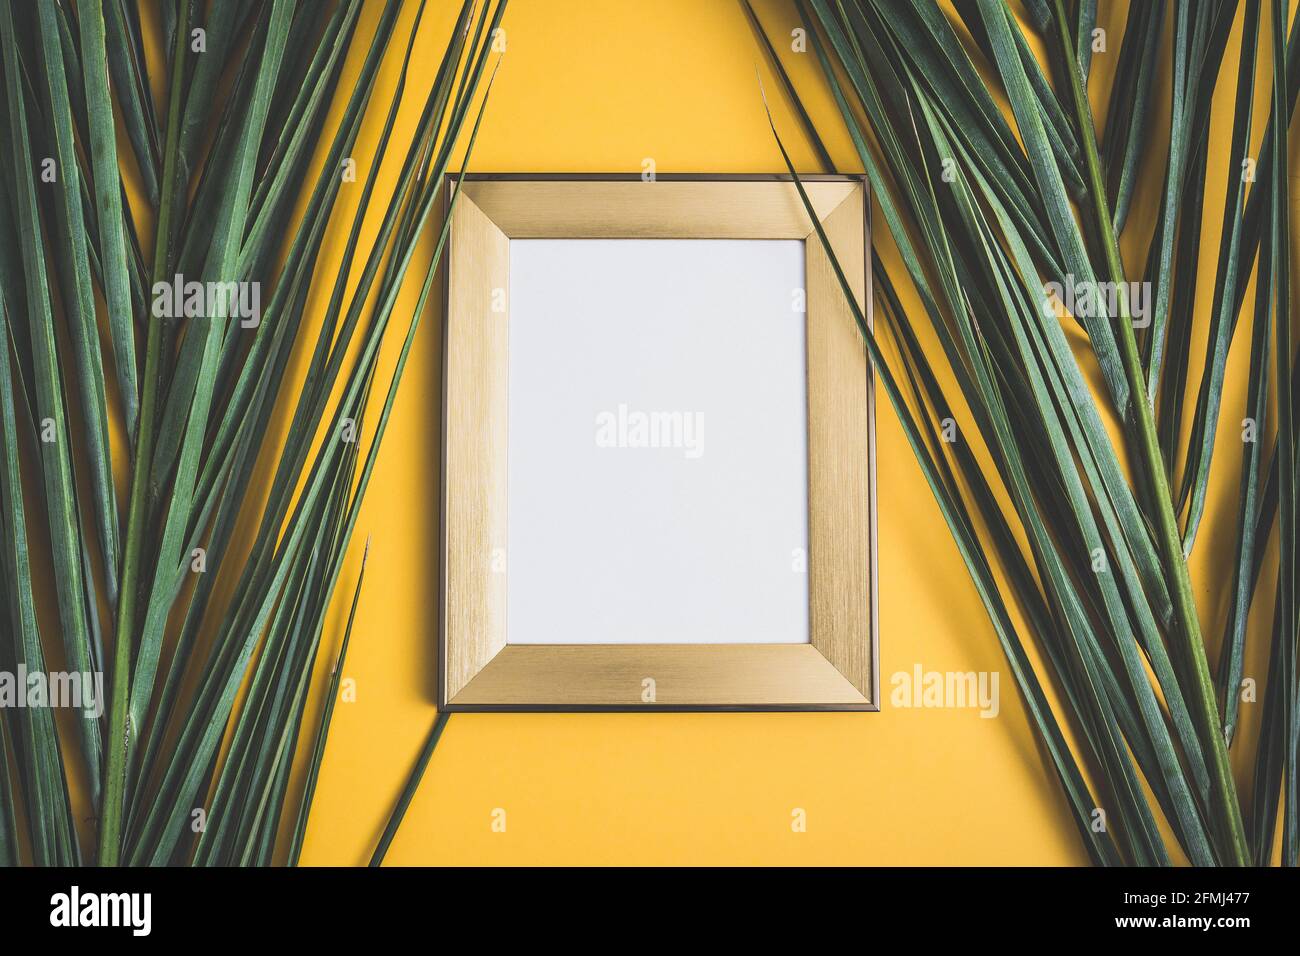 Wooden frame with white picture hanging on orange wall decorated with fresh green palm leaves at home Stock Photo